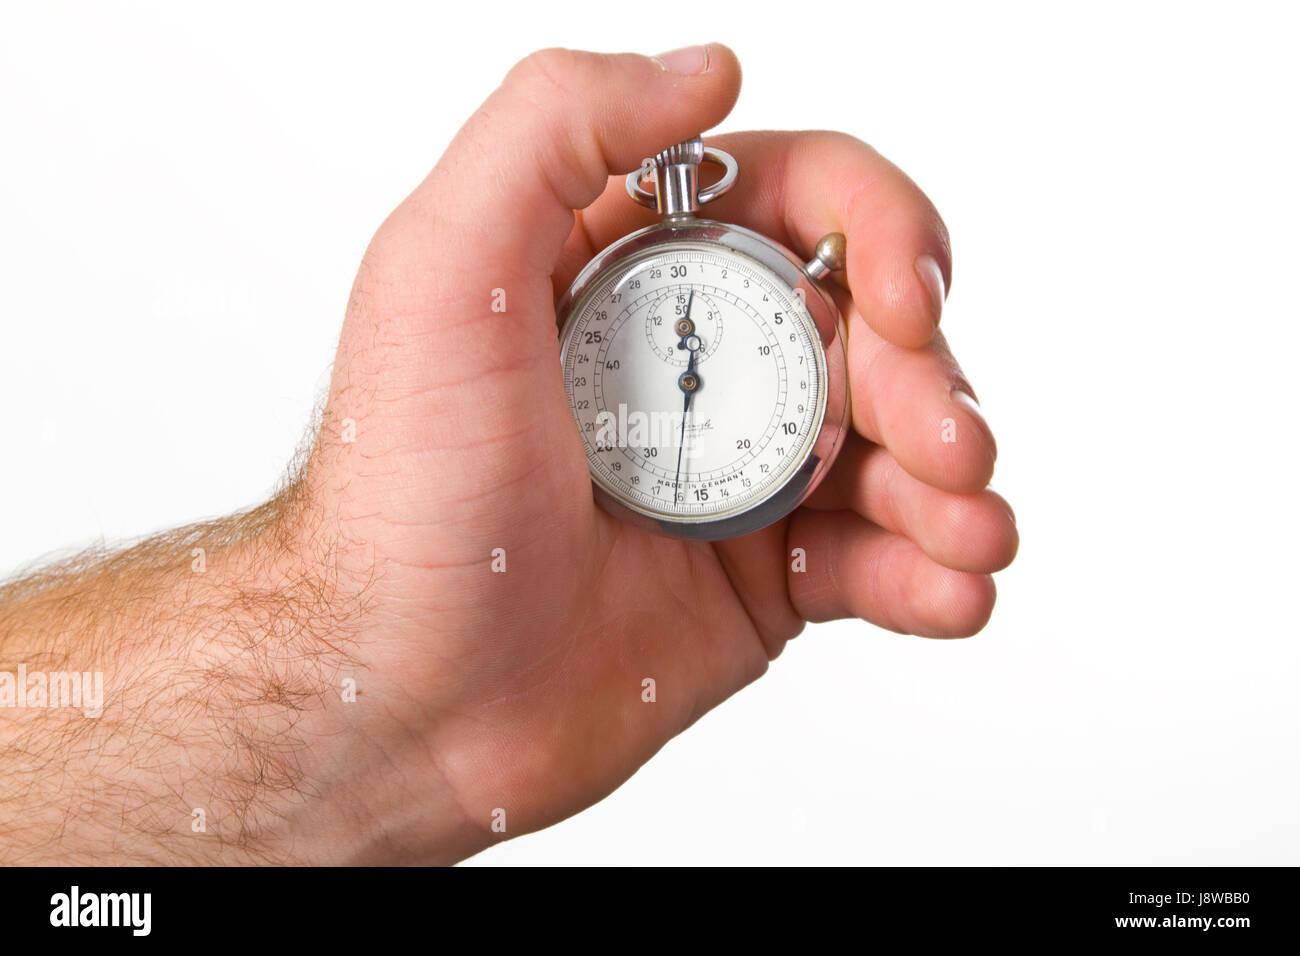 hand, time, hold, time measurement, stopwatch, deadline, respite, hand, finger, Stock Photo